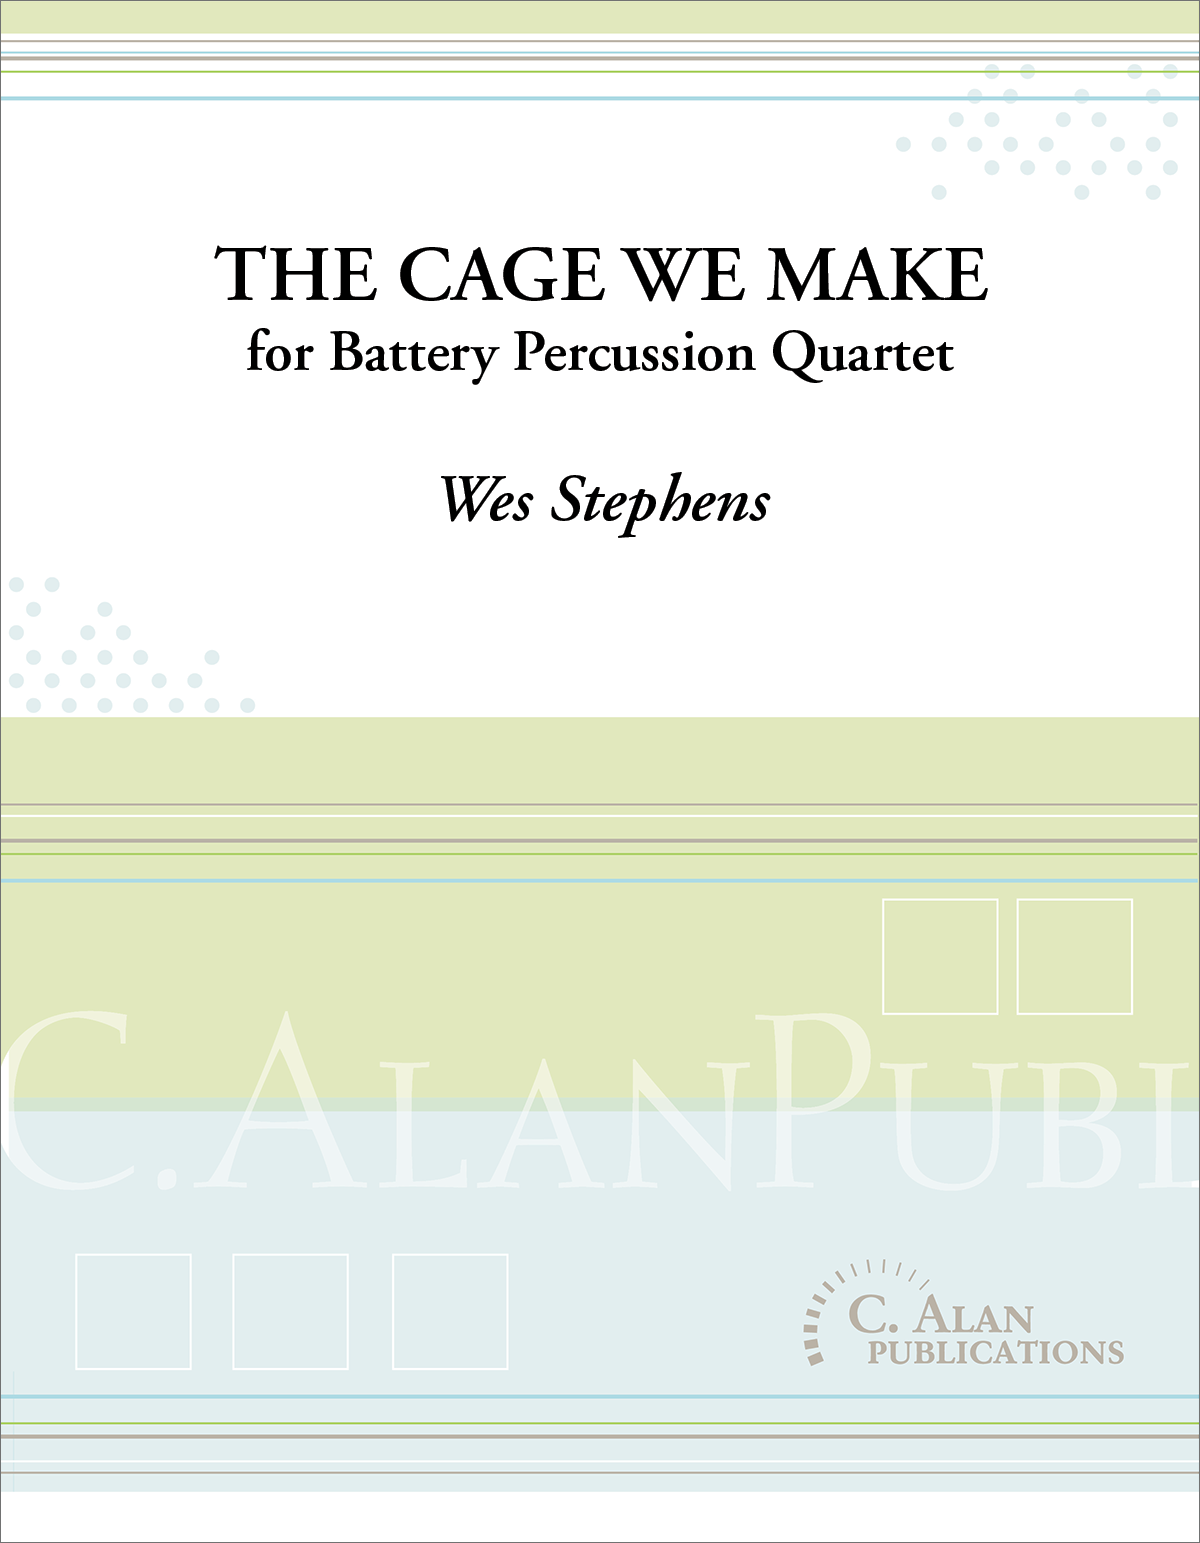 The-Cage-We-Make | Stephens, Wes